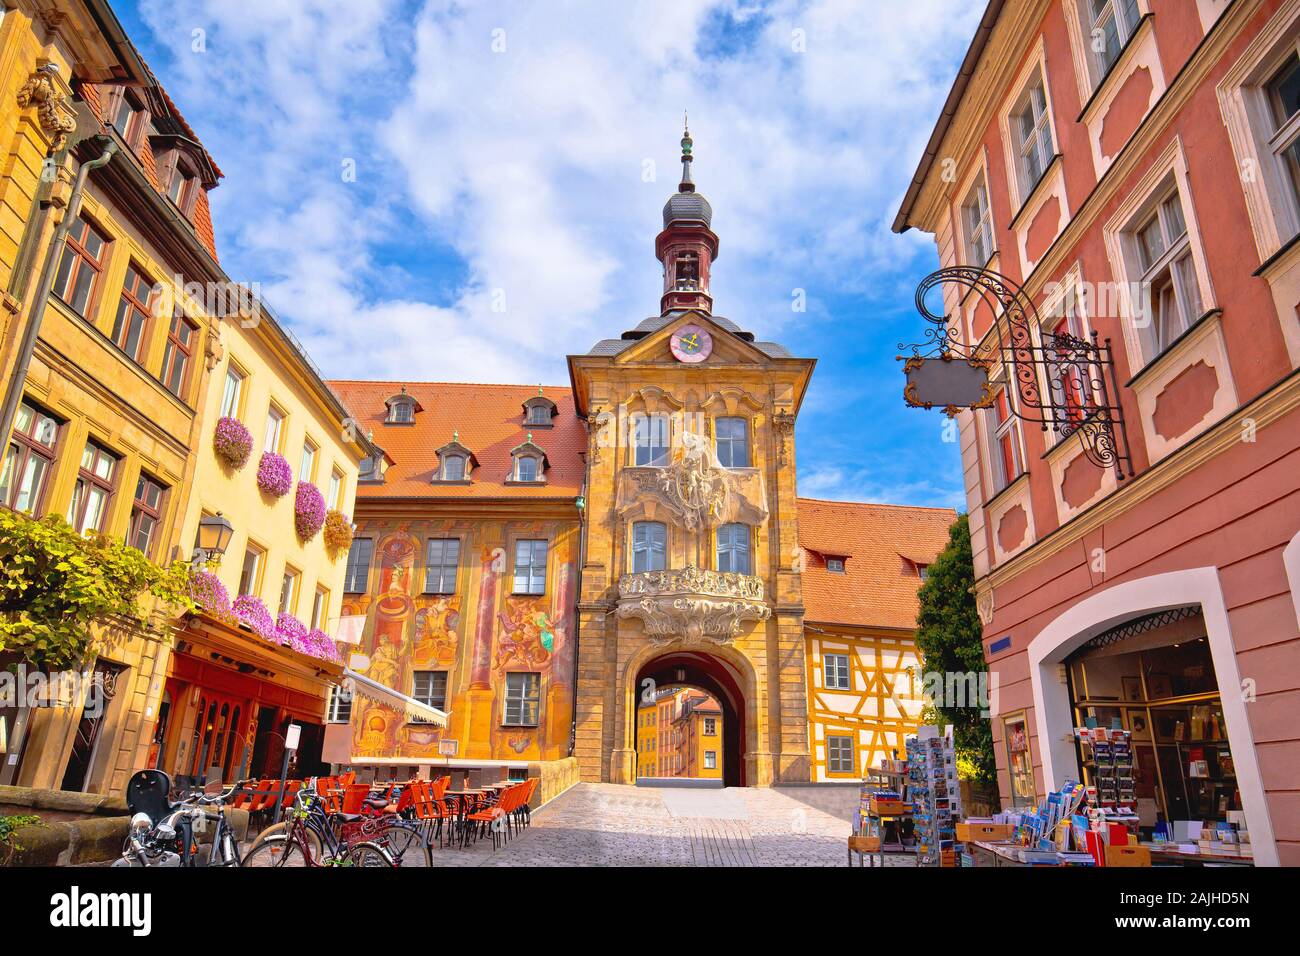 Bamberg. Old town of Bamberg historic street and architecture view, Upper Franconia, Bavaria region of Germany Stock Photo